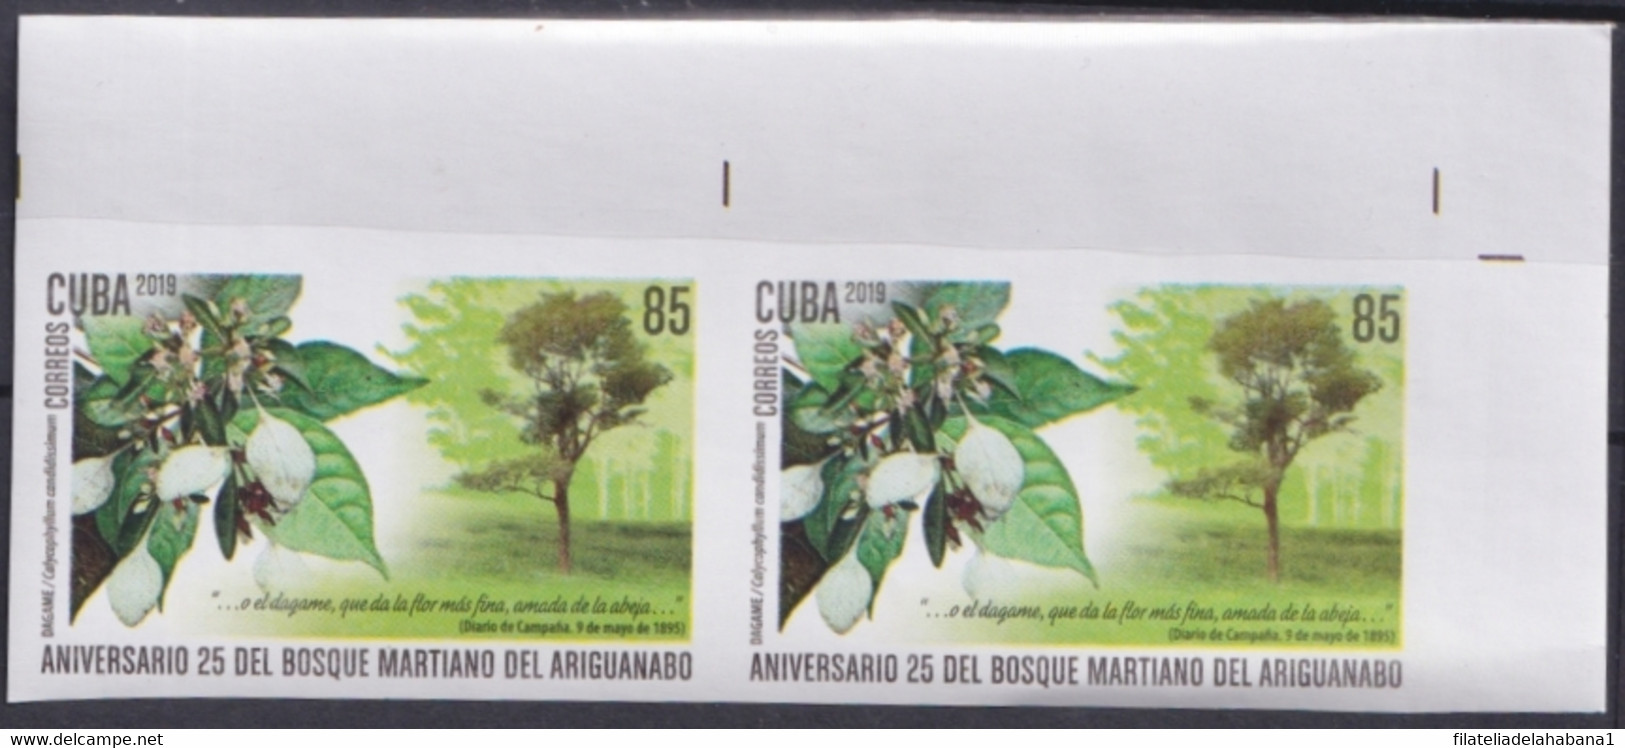 2019.208 CUBA MNH 2019 IMPERFORATED PROOF 85c MARTI TREE ARIGUANABO DAGAME. - Imperforates, Proofs & Errors